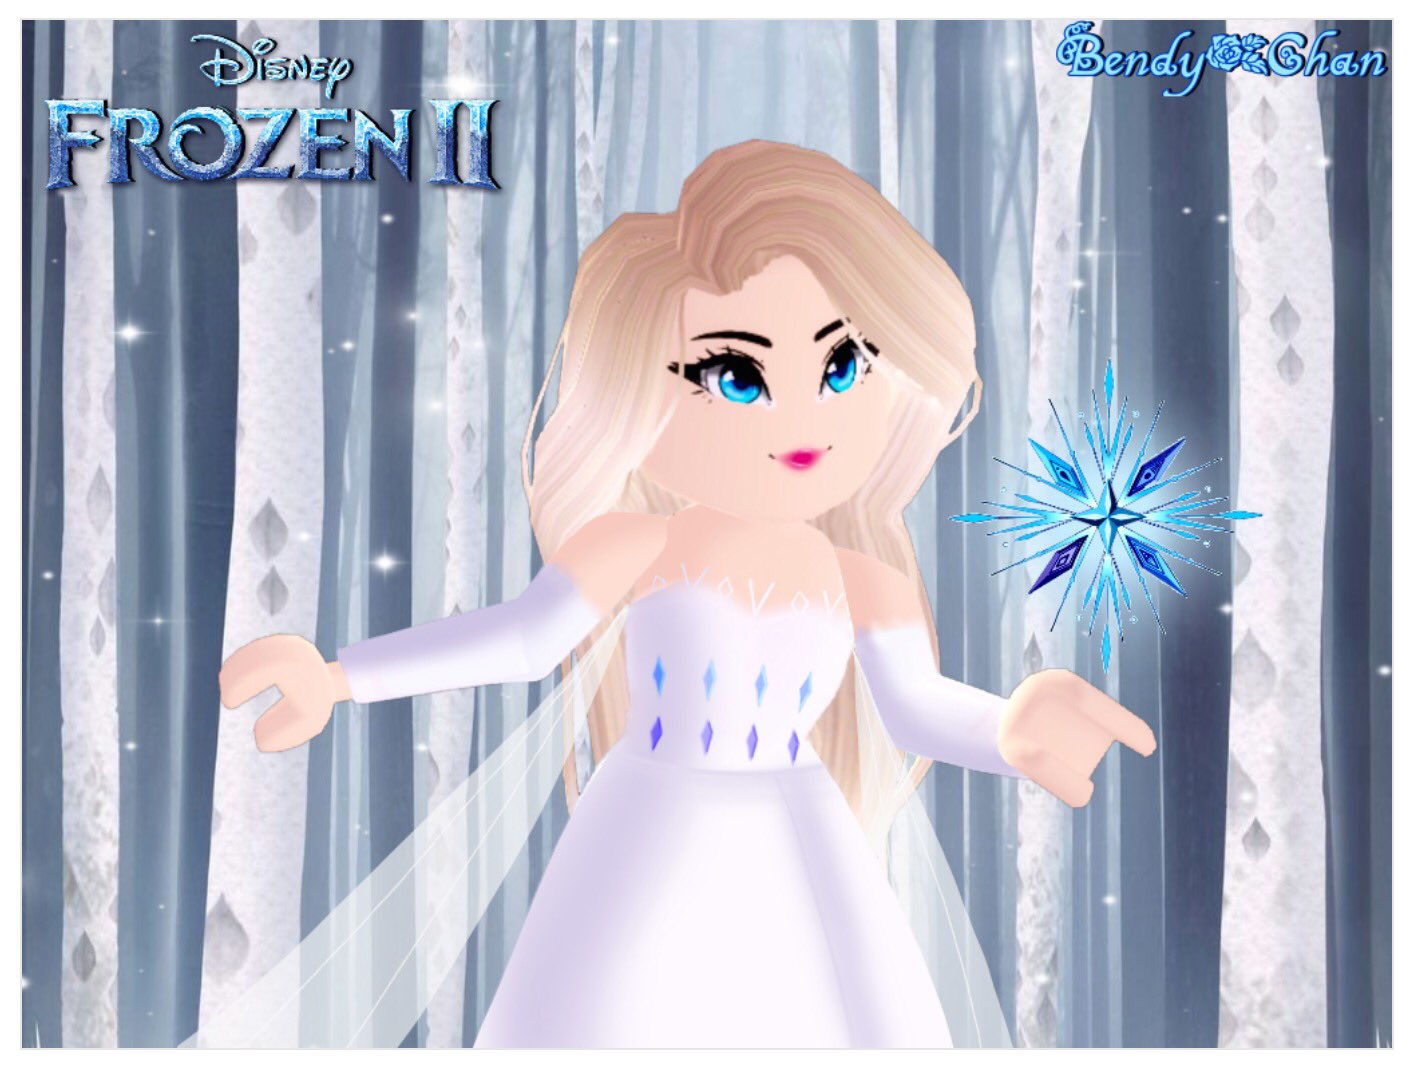 Frozen 2 Elsa and Annas New Hairstyles And Tutorials   styleguidestutorials tips  Celebrity Hair Extensions and more   Cliphair US Hair Blog blog